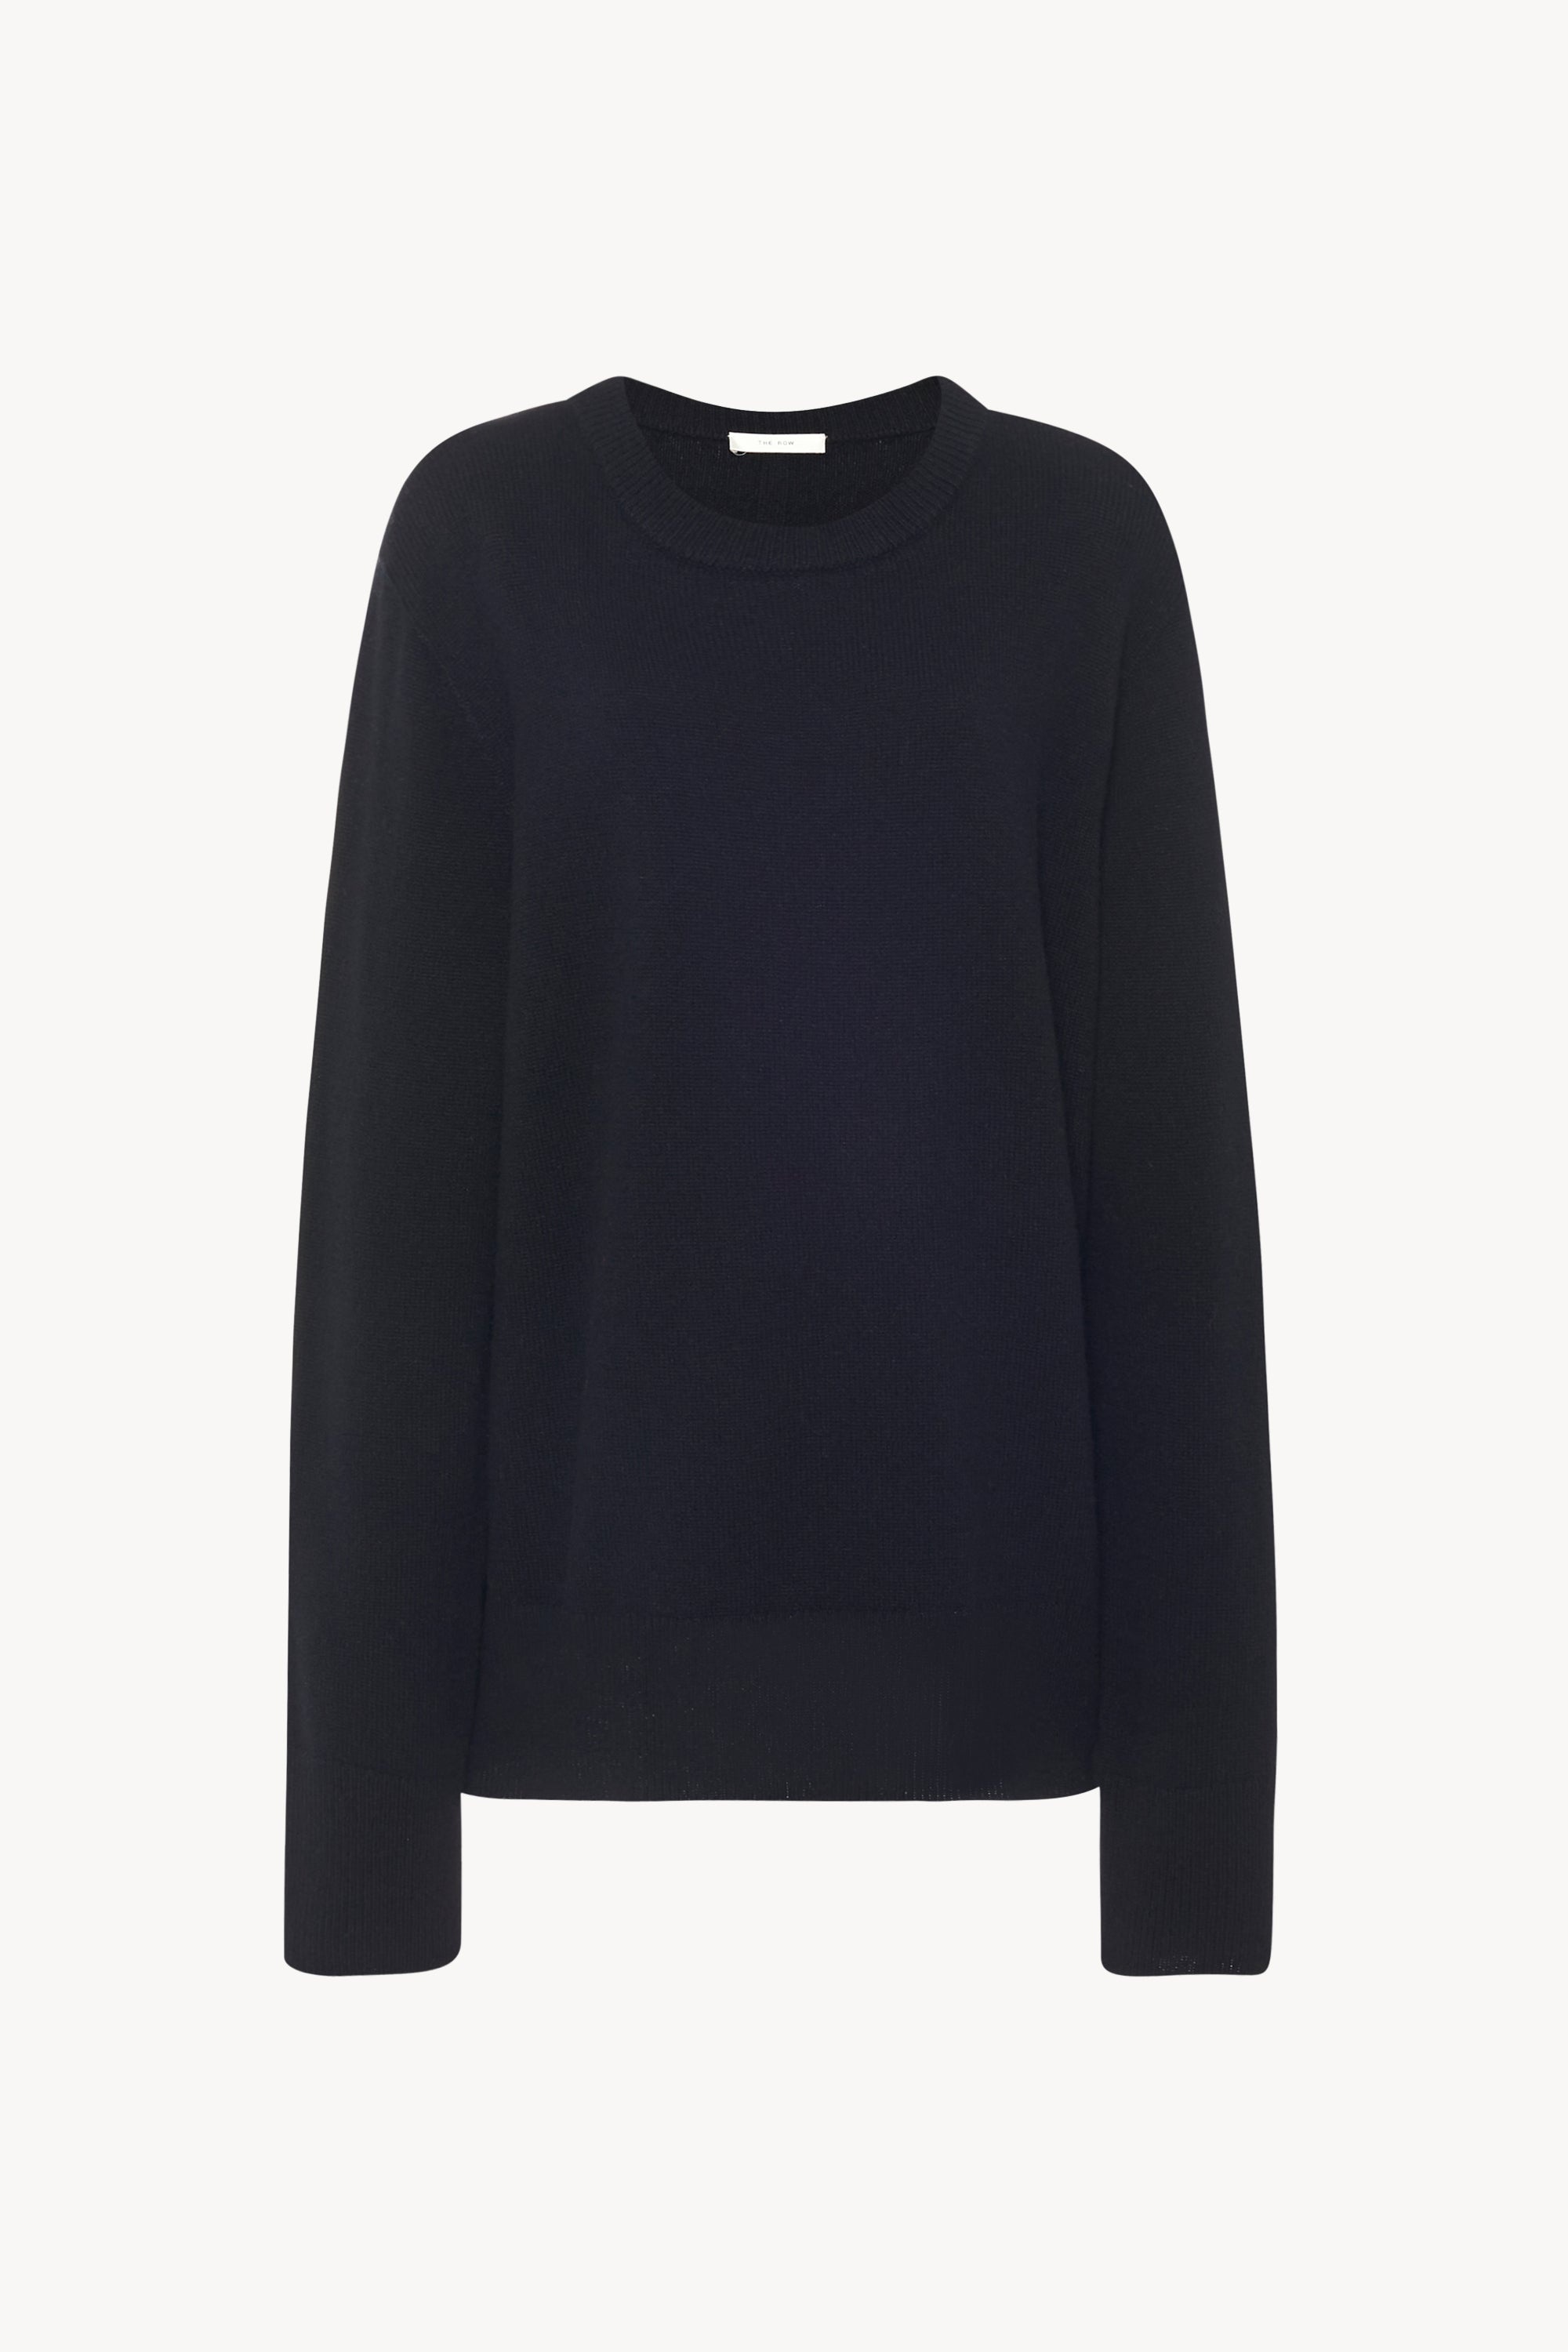 Sibem Top in Wool and Cashmere - 1